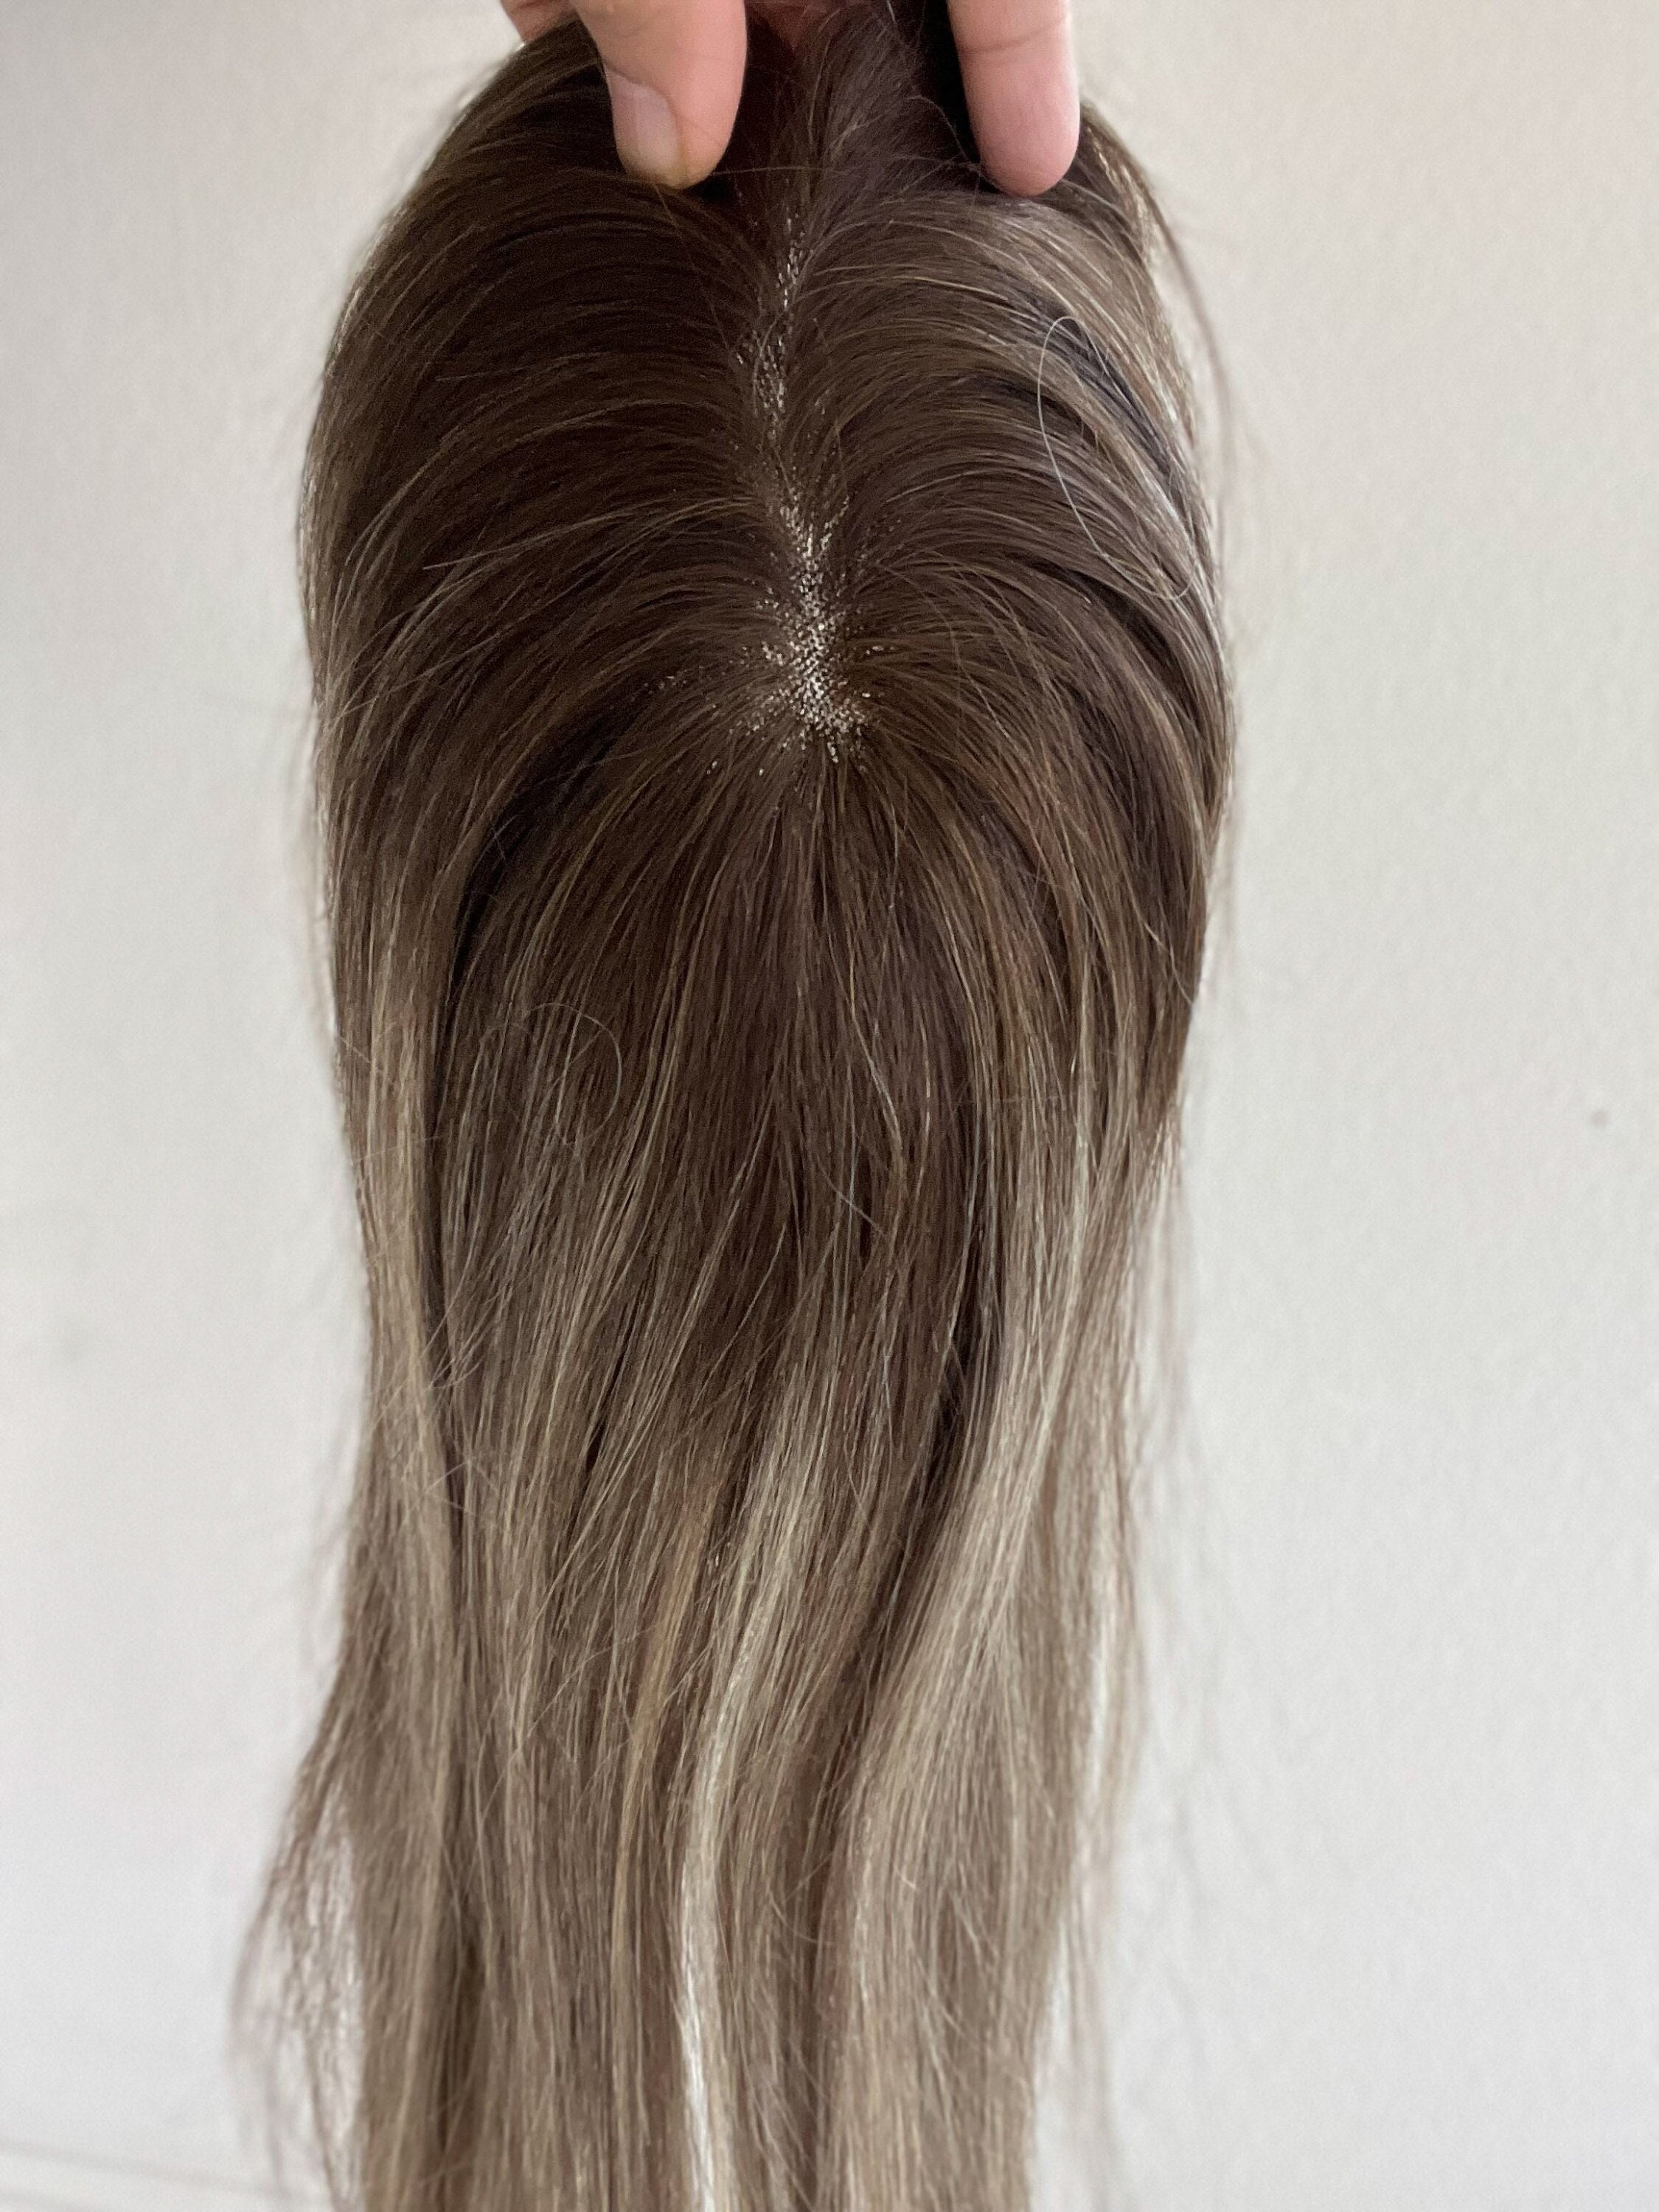 Honey Brown  Ash Blonde 1224 Hair Topper 14 inch For Thinning Hair Full  Crown Size 65 inch x 225 inch Weight 50g Remy Human Hair